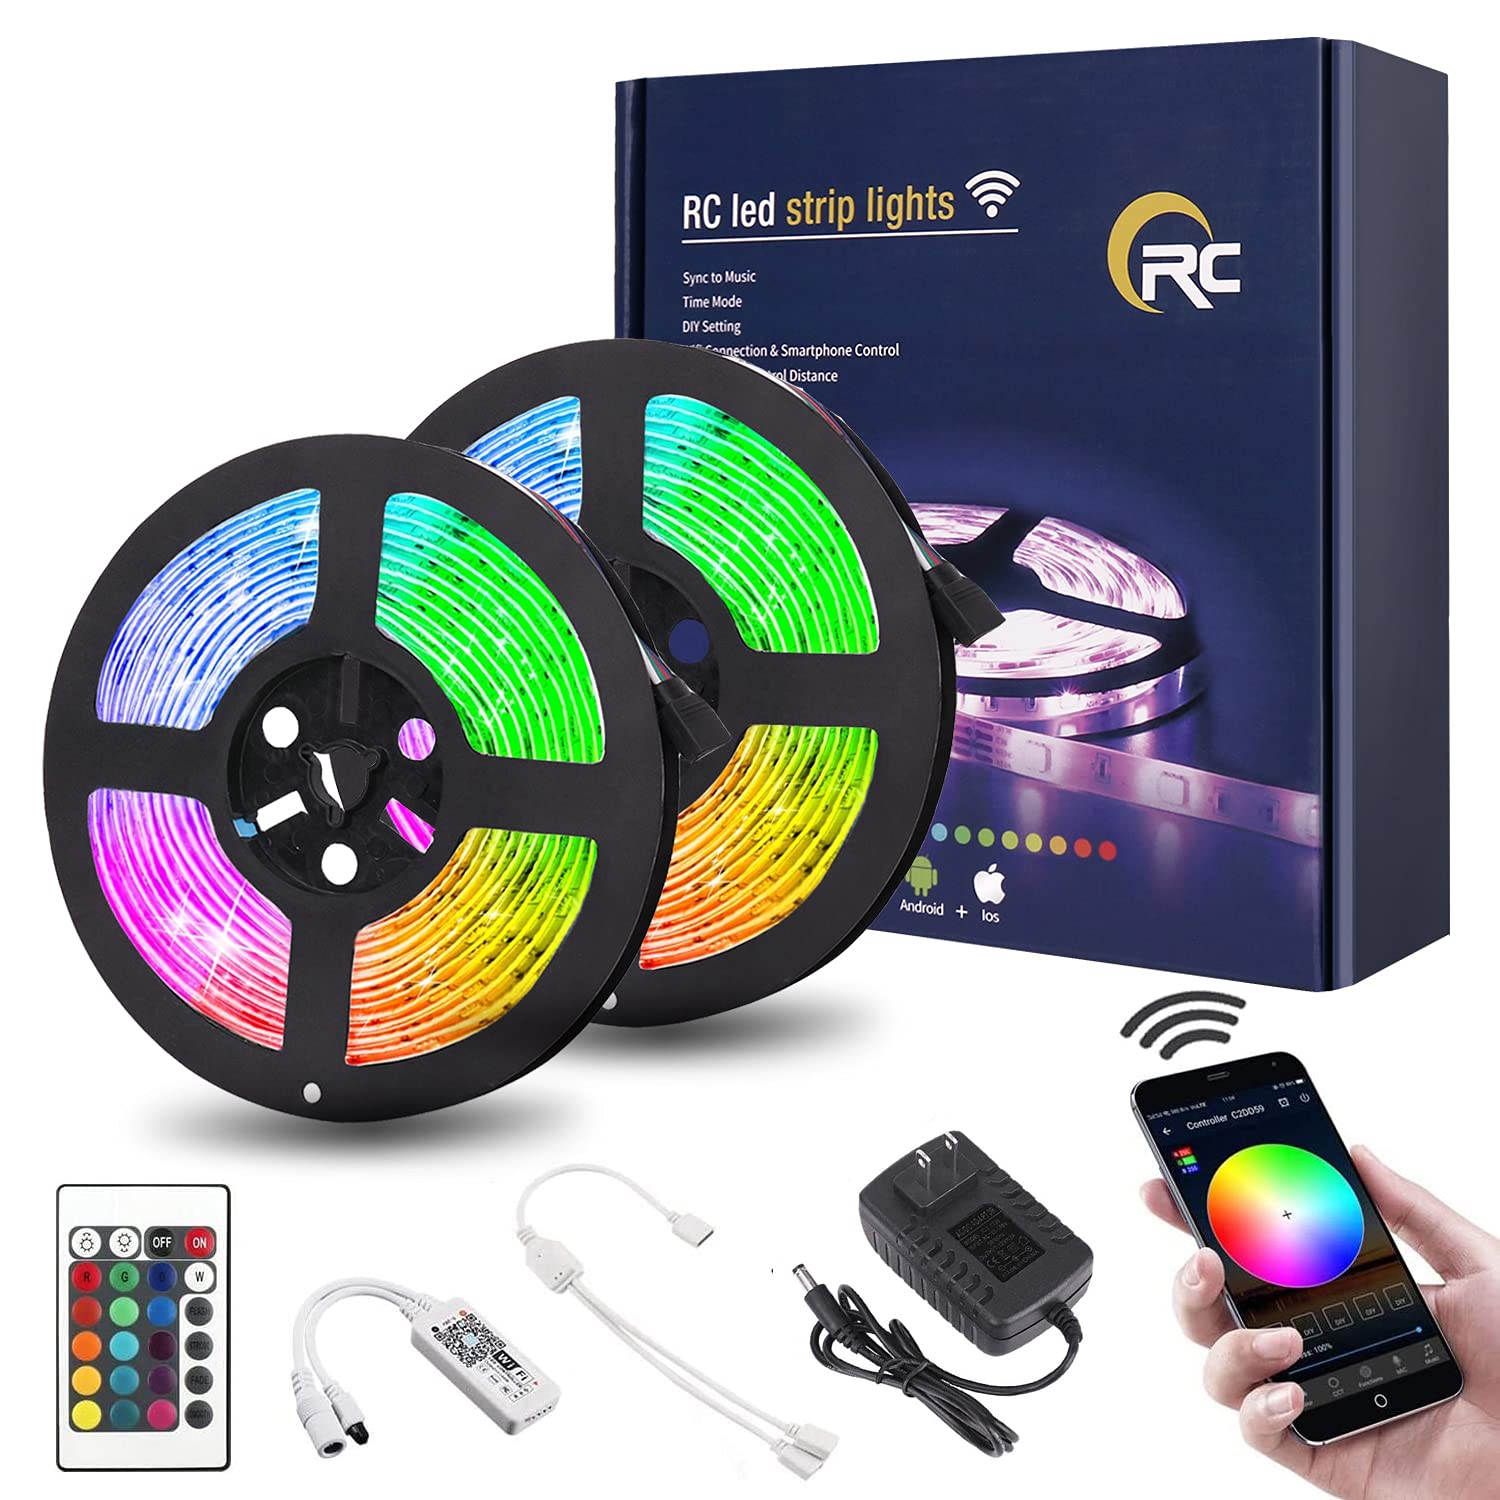 Book Cover RC WiFi Wireless LED Strip Lights, Color Changing 32.8ft IP65 Waterproof Flexible Light Strips SMD5050 300LEDs with RGB Smart Controller 24Key IR Remote, Works with Android, iOS, Alexa, Siri, IFTTT